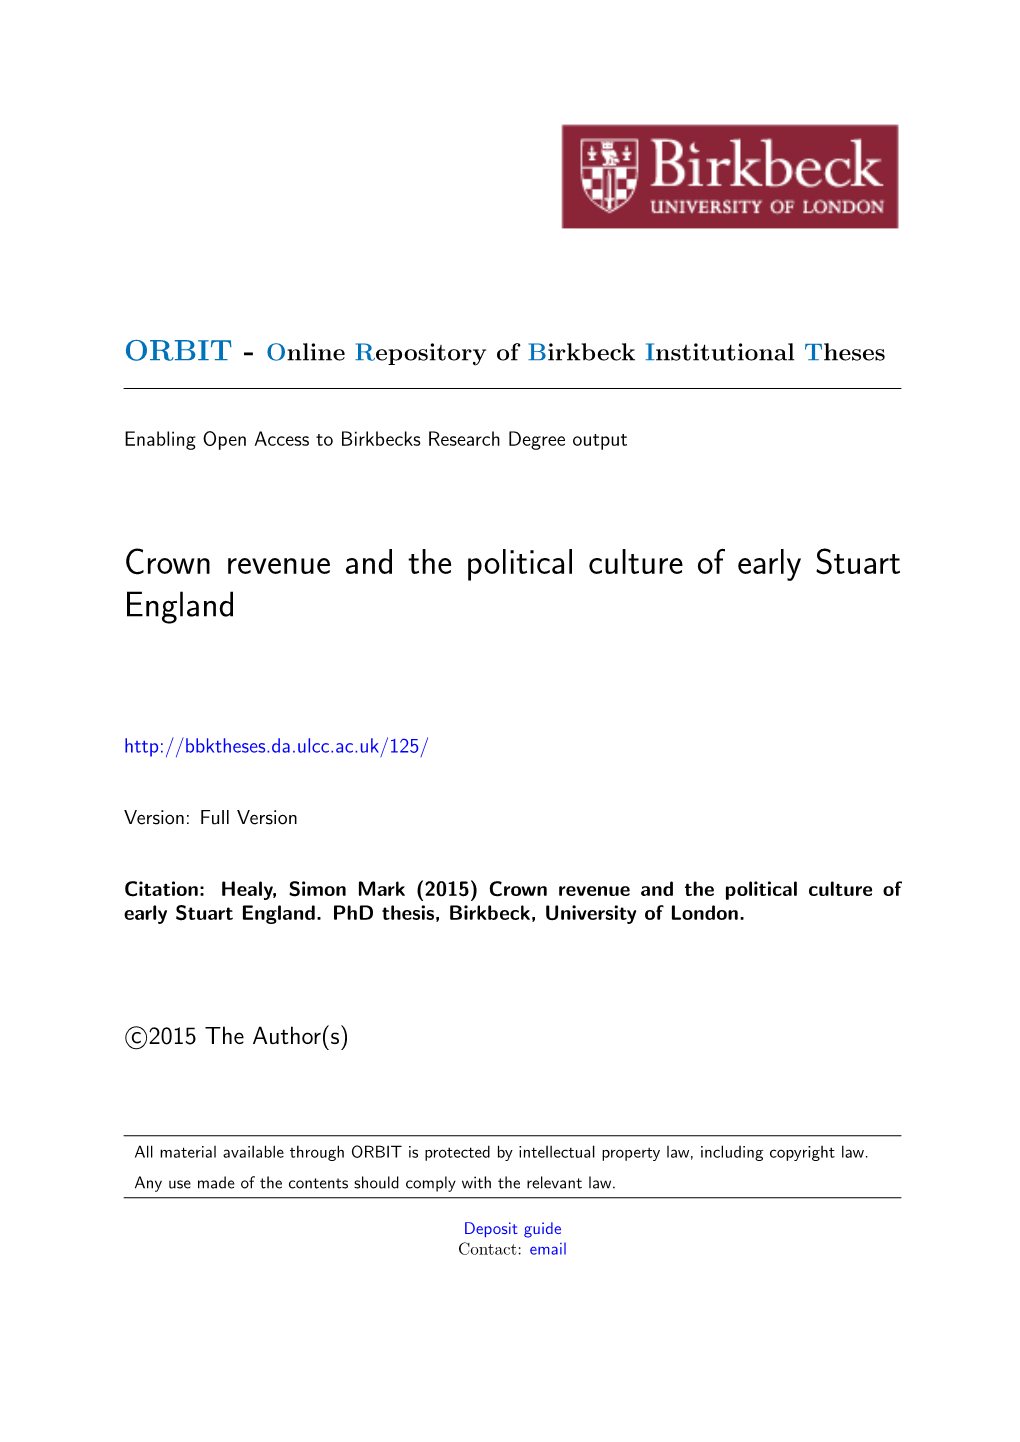 Crown Revenue and the Political Culture of Early Stuart England